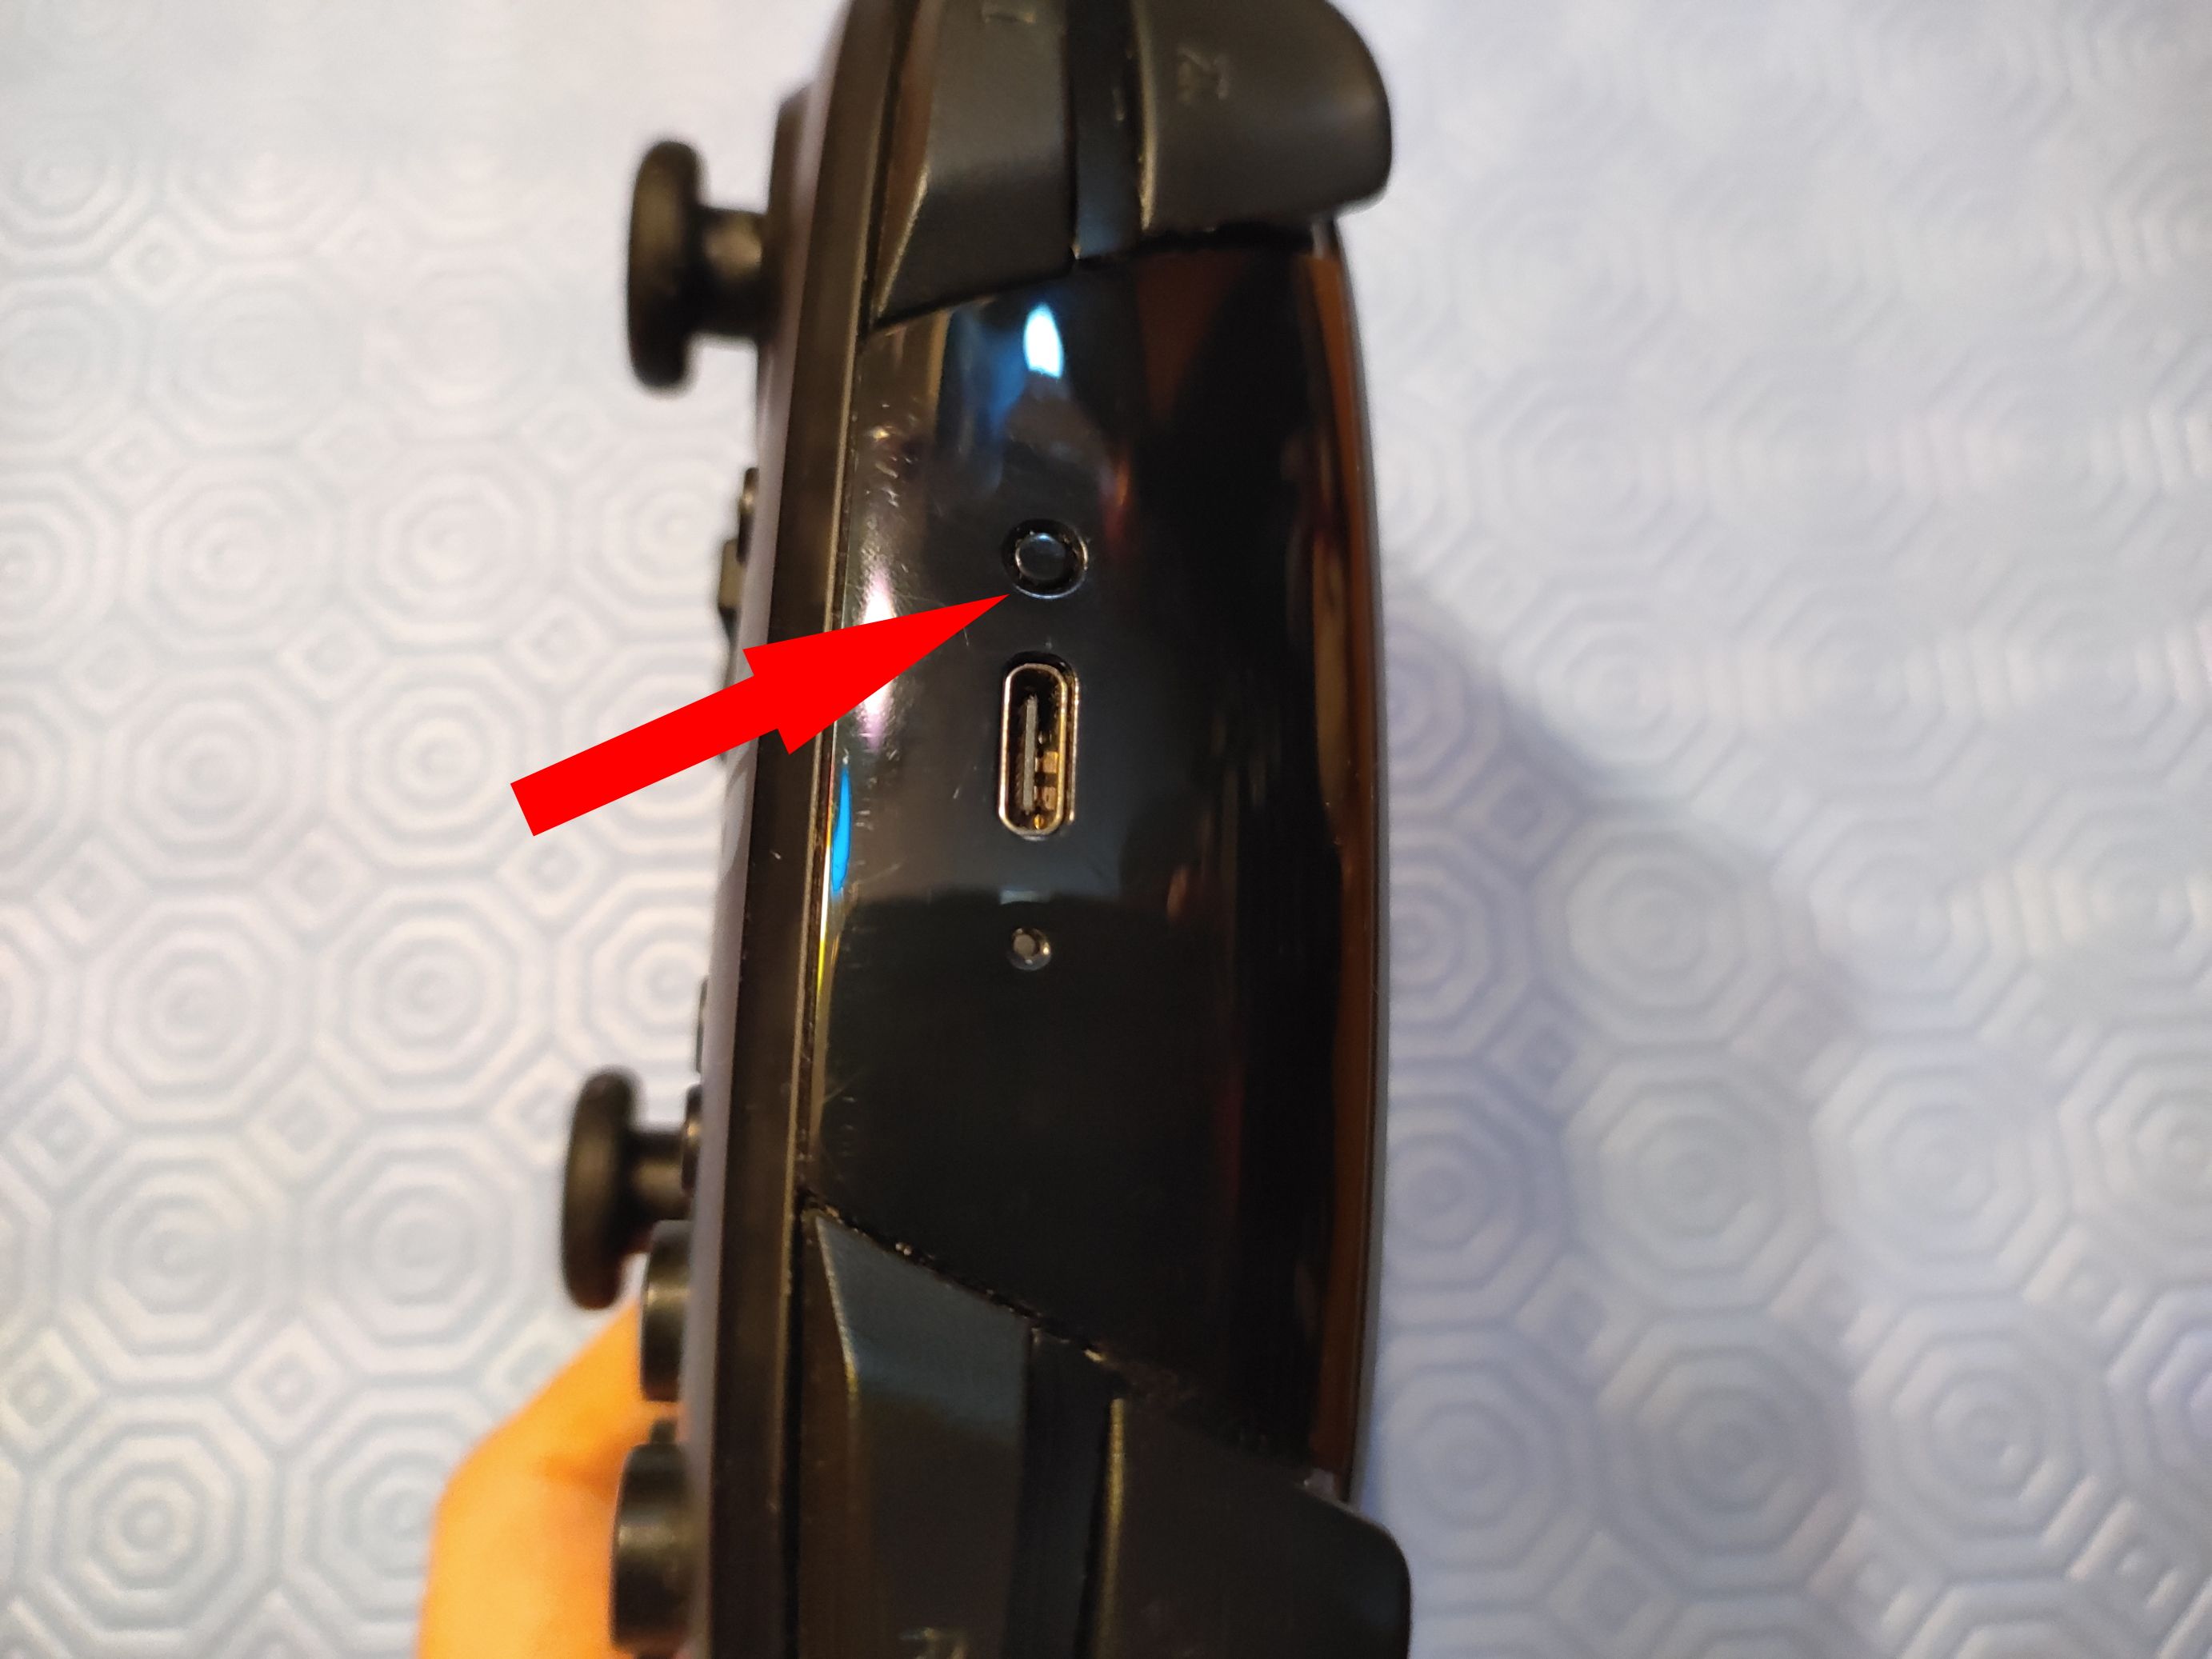 Photograph of the sync button for a Nintendo Switch Pro controller